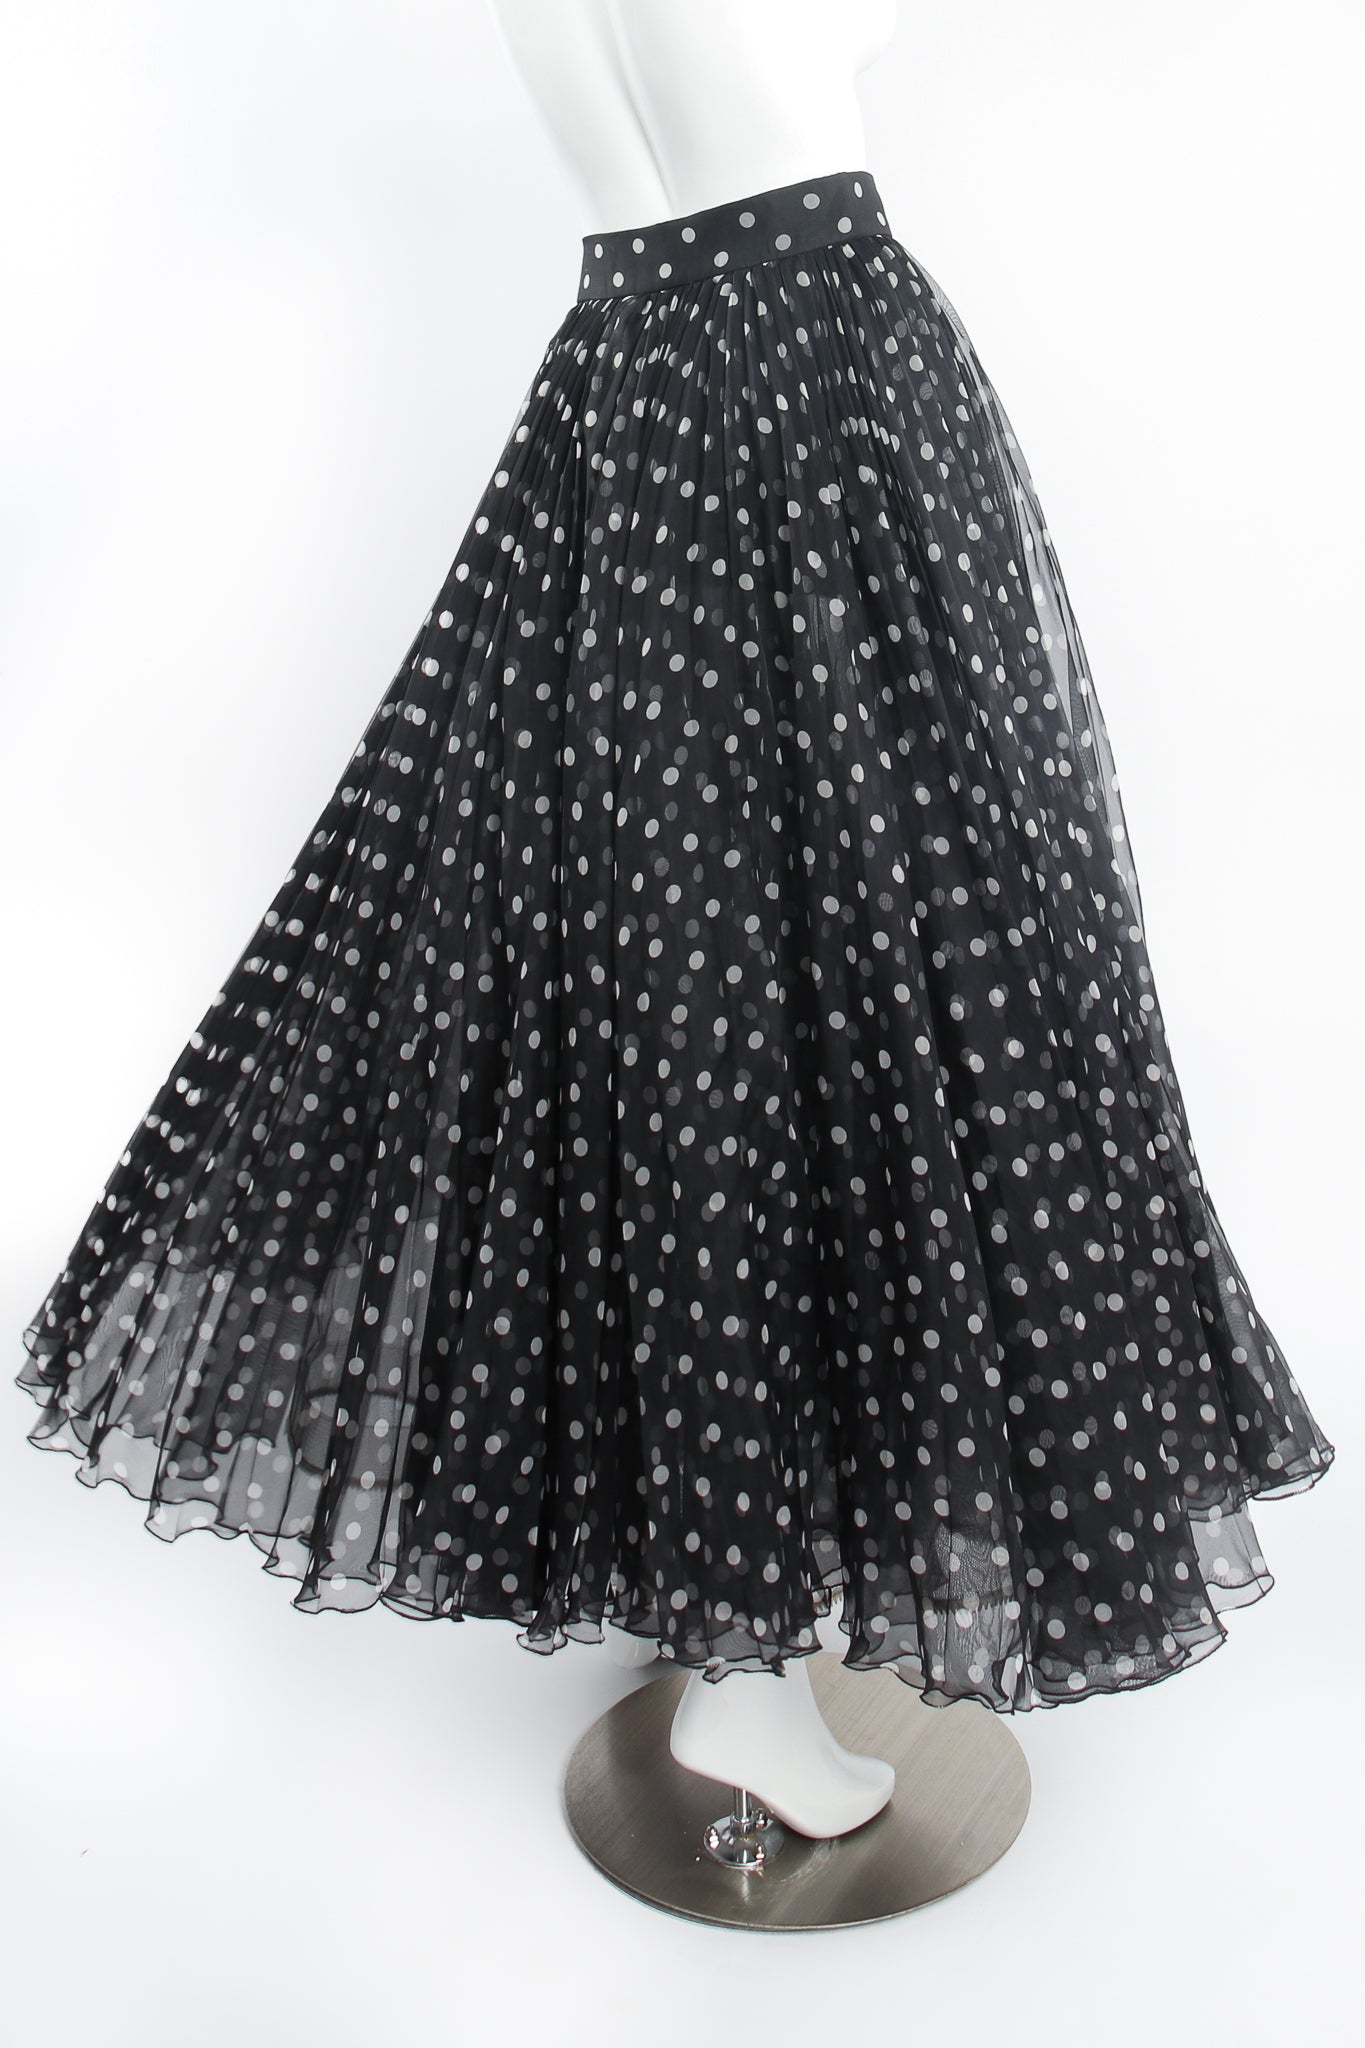 Vintage Christian Dior by Gianfranco Ferre Layered Organza Dot Skirt on mannequin back @ Recess LA